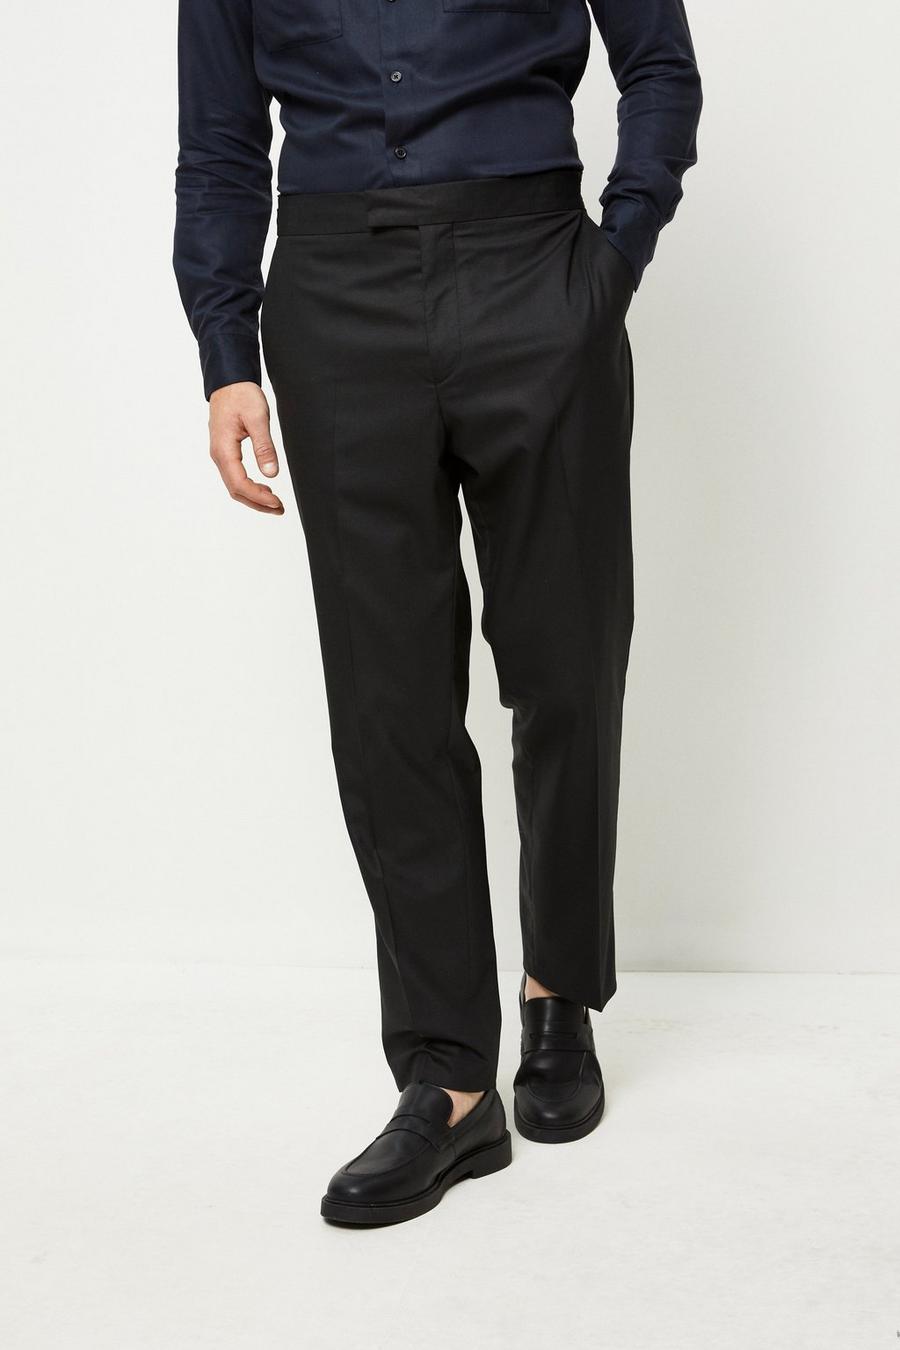 1904 Tailored Fit Black Suit Trousers